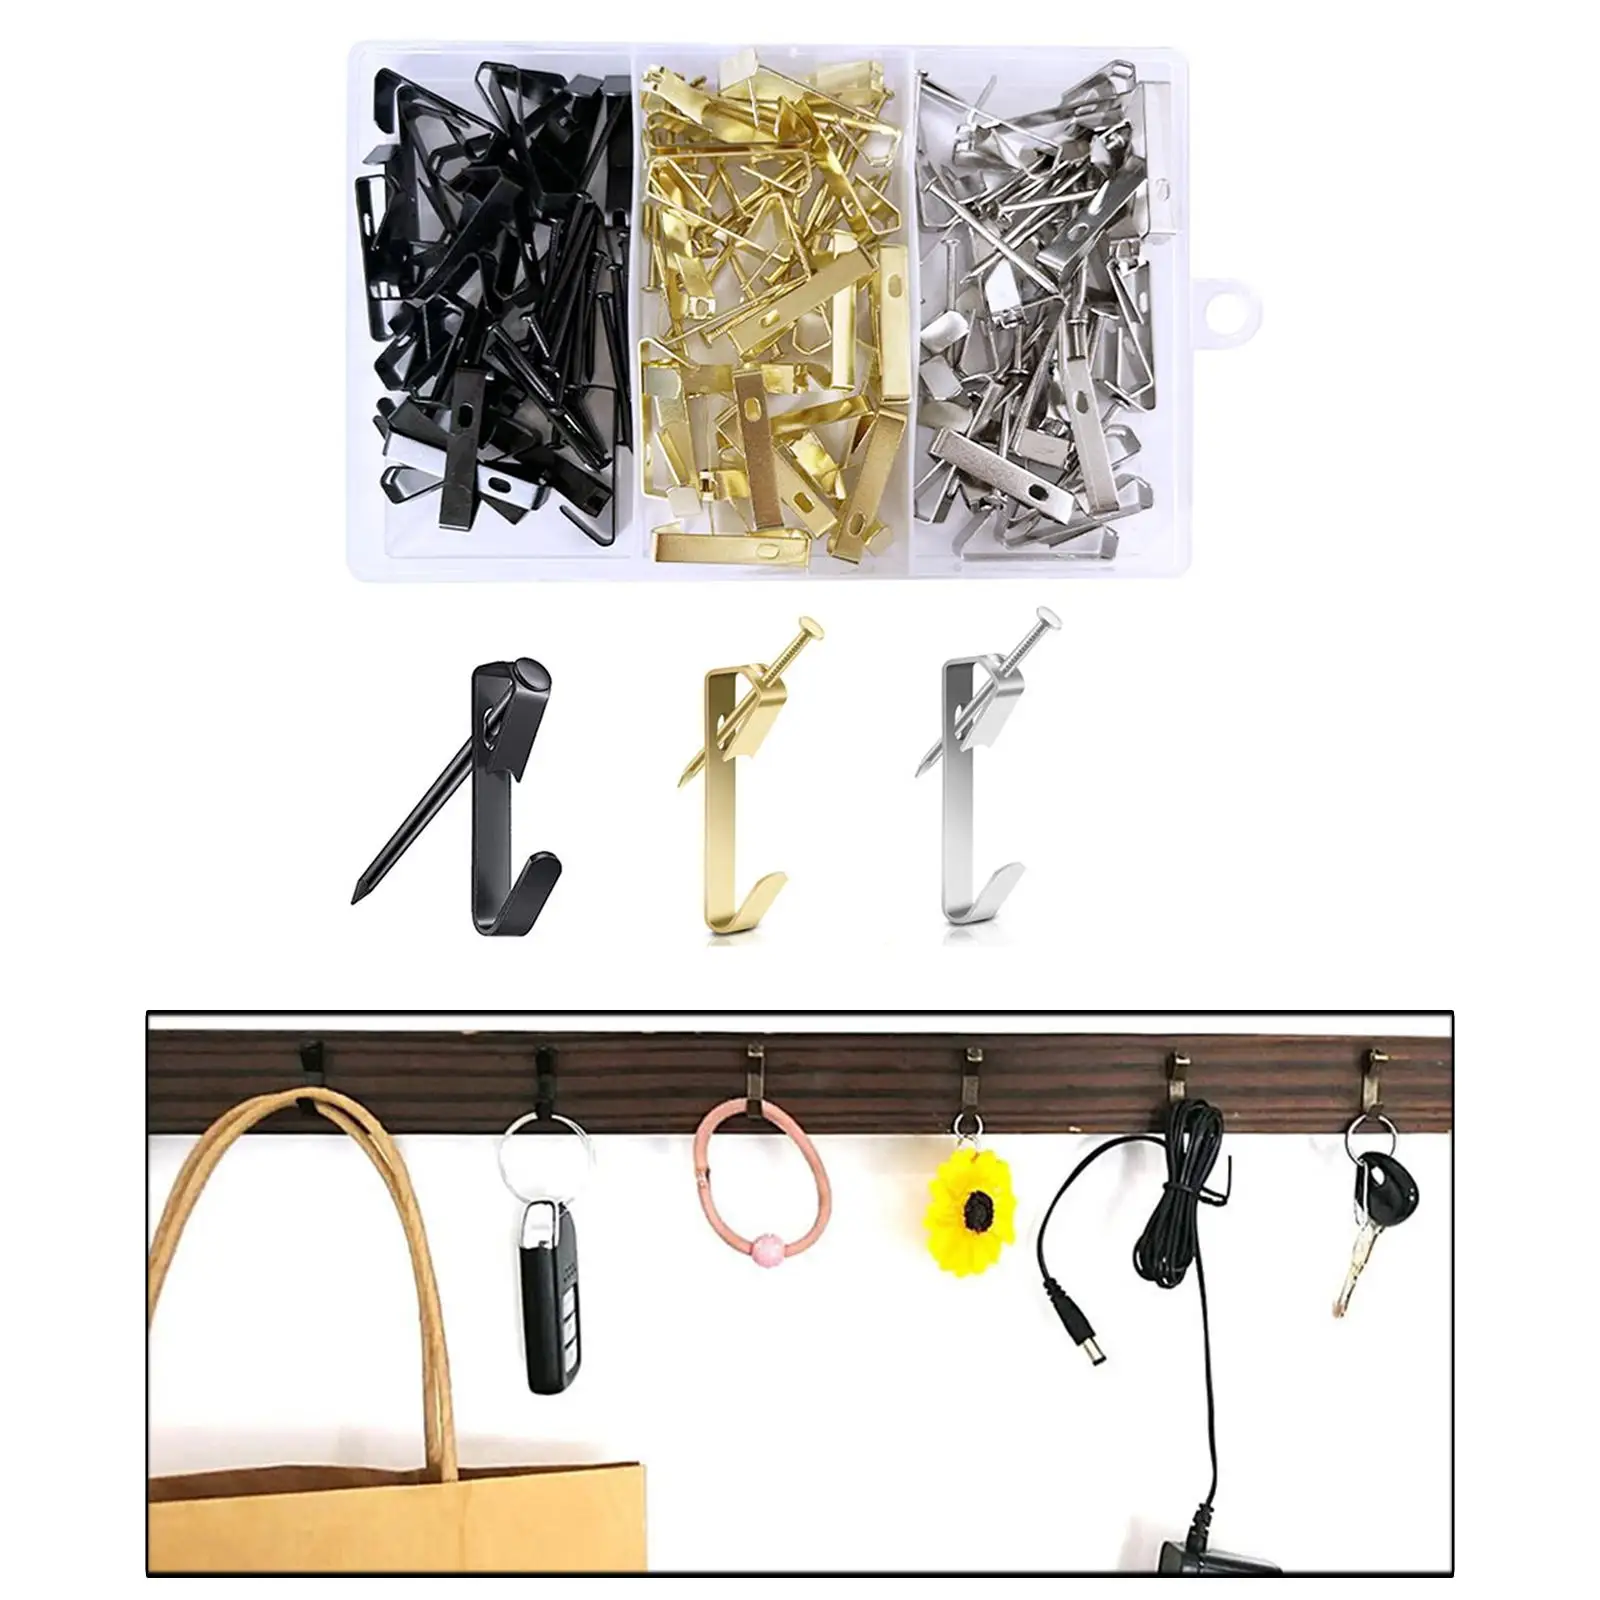 75 Pieces Picture Hangers Iron Reusable Professional Multipurpose Picture Hooks Heavy Duty for Umbrella Keys Clock Bags Pictures